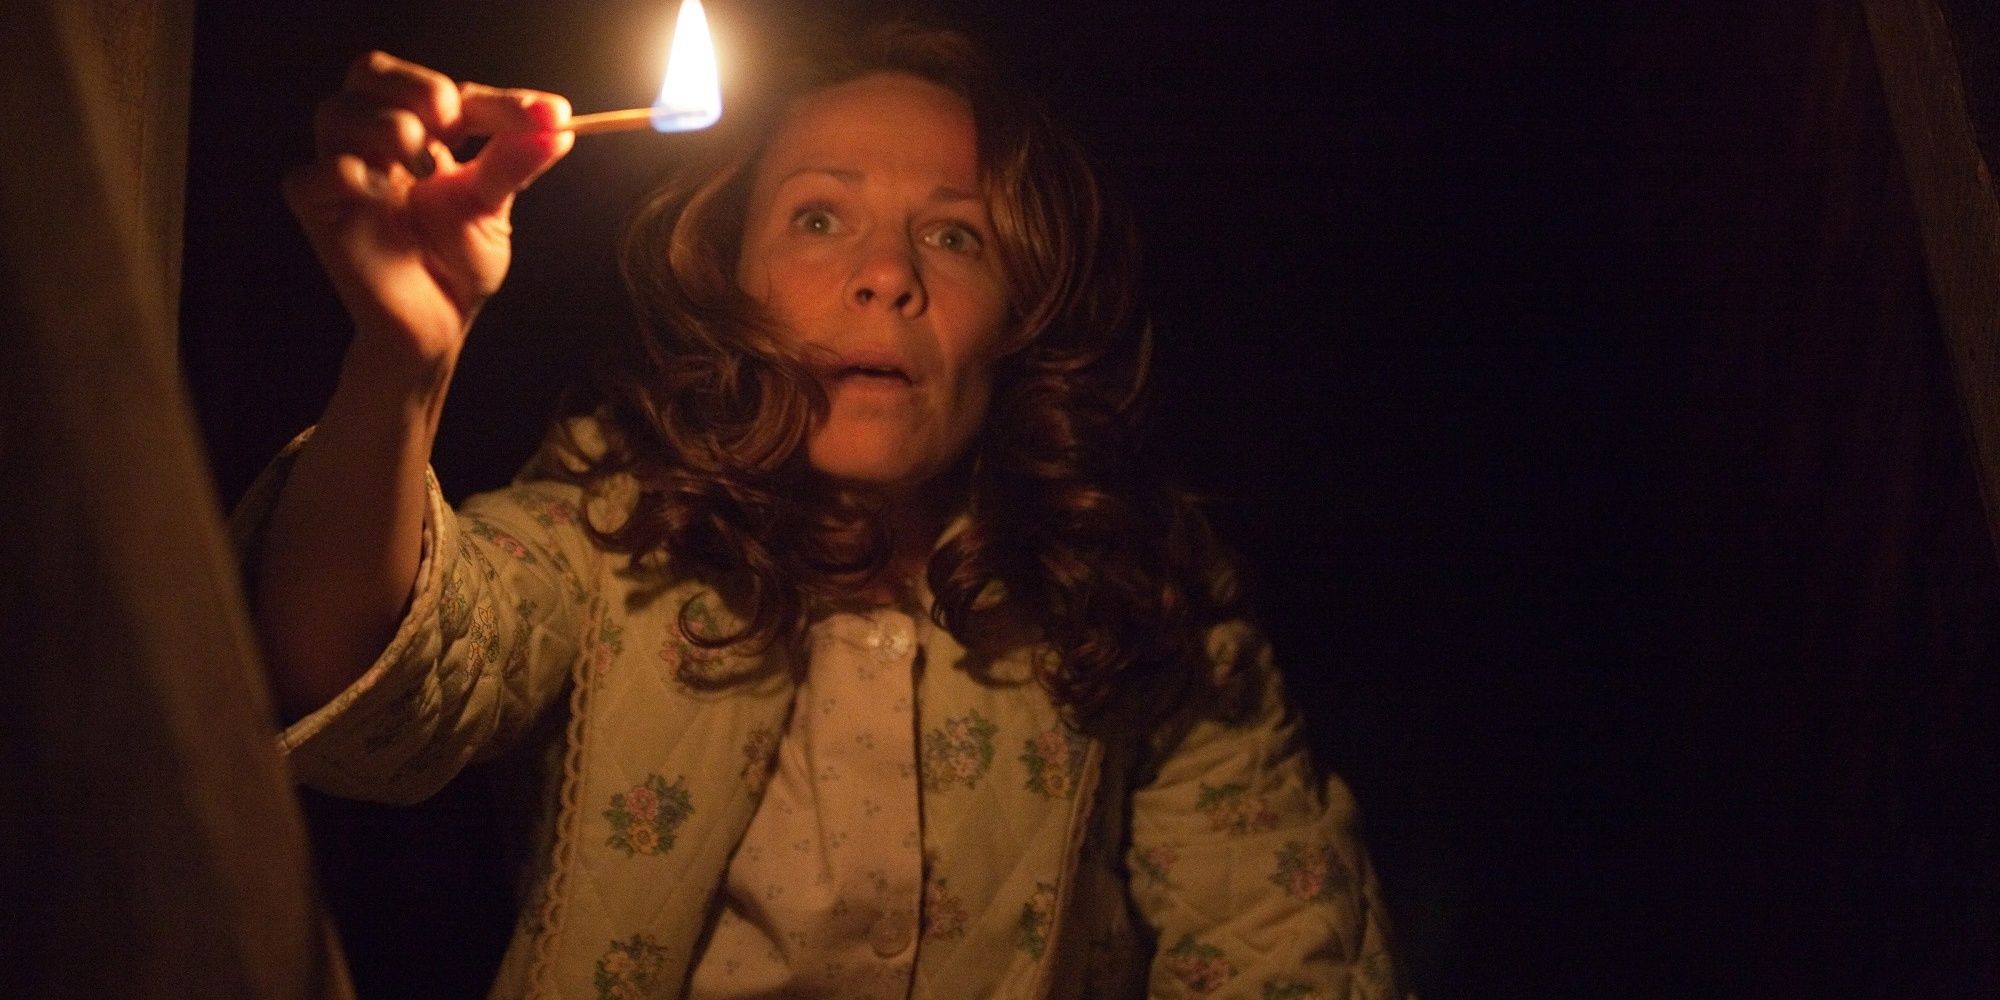 Carolyn Perron holding a match and looking into the basement in 'The Conjuring.'